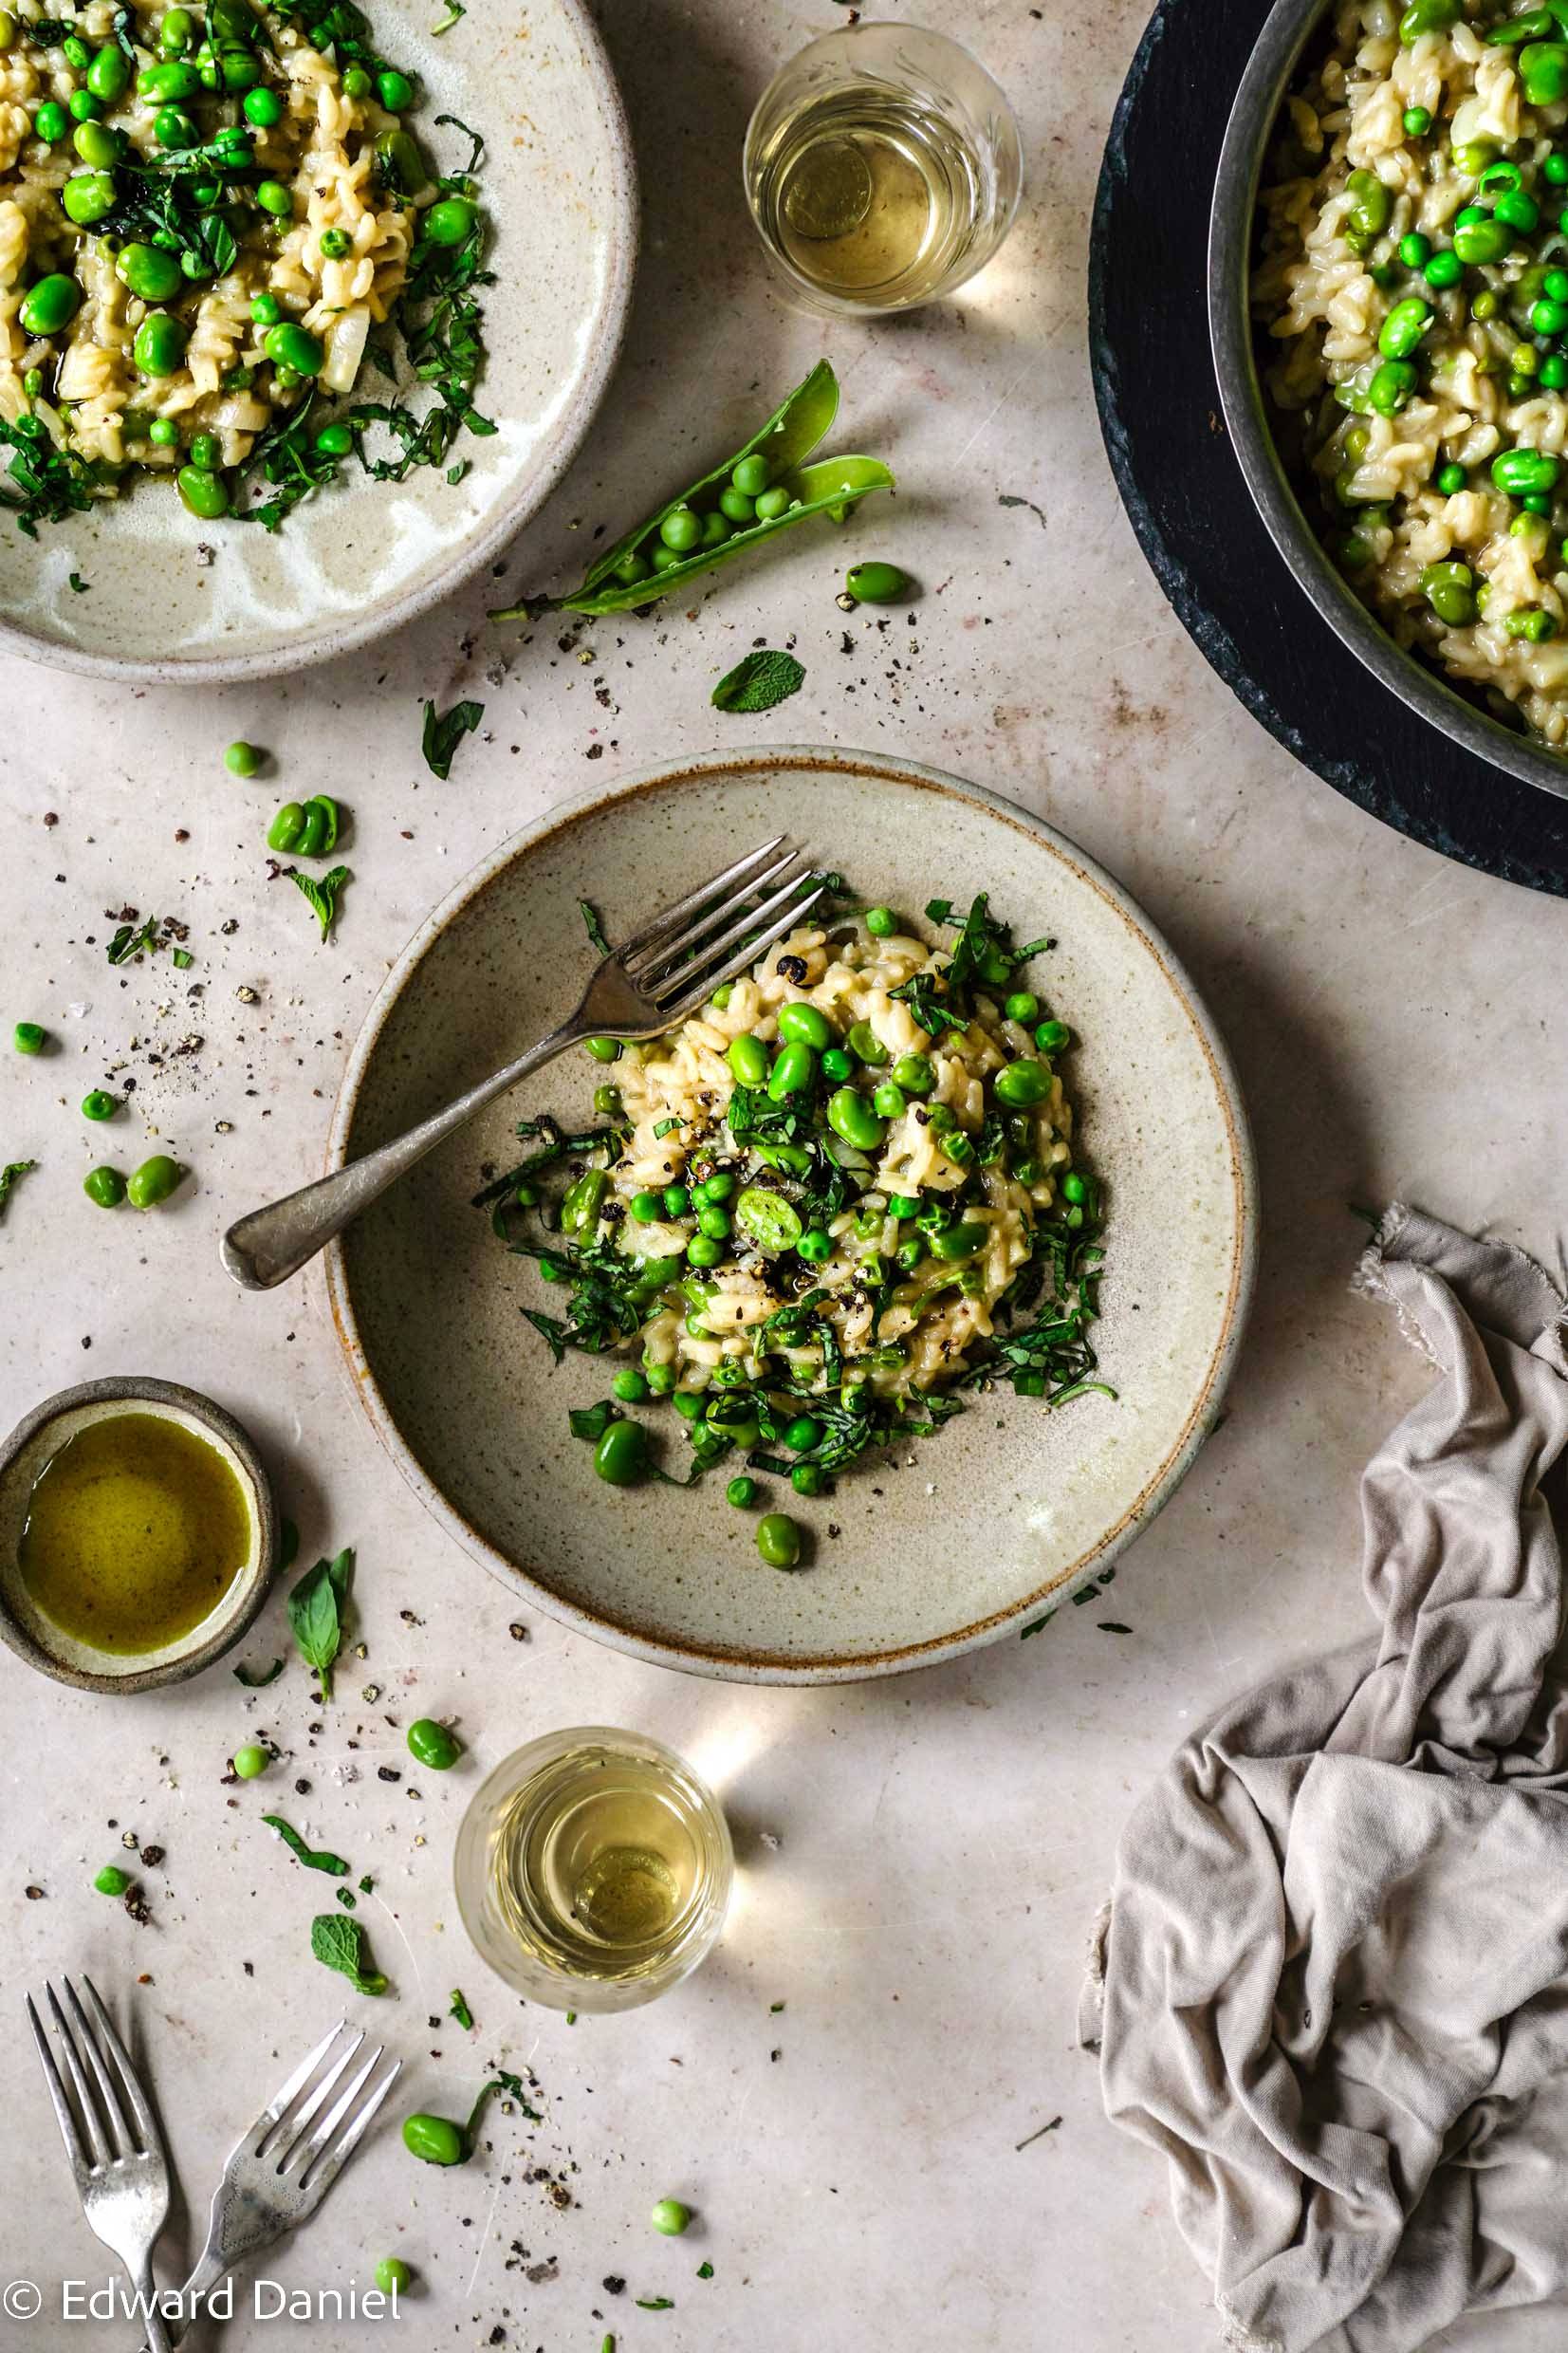 https://www.ethivegan.com/wp-content/uploads/2015/11/Broad-Bean-and-Pea-Risotto.jpg